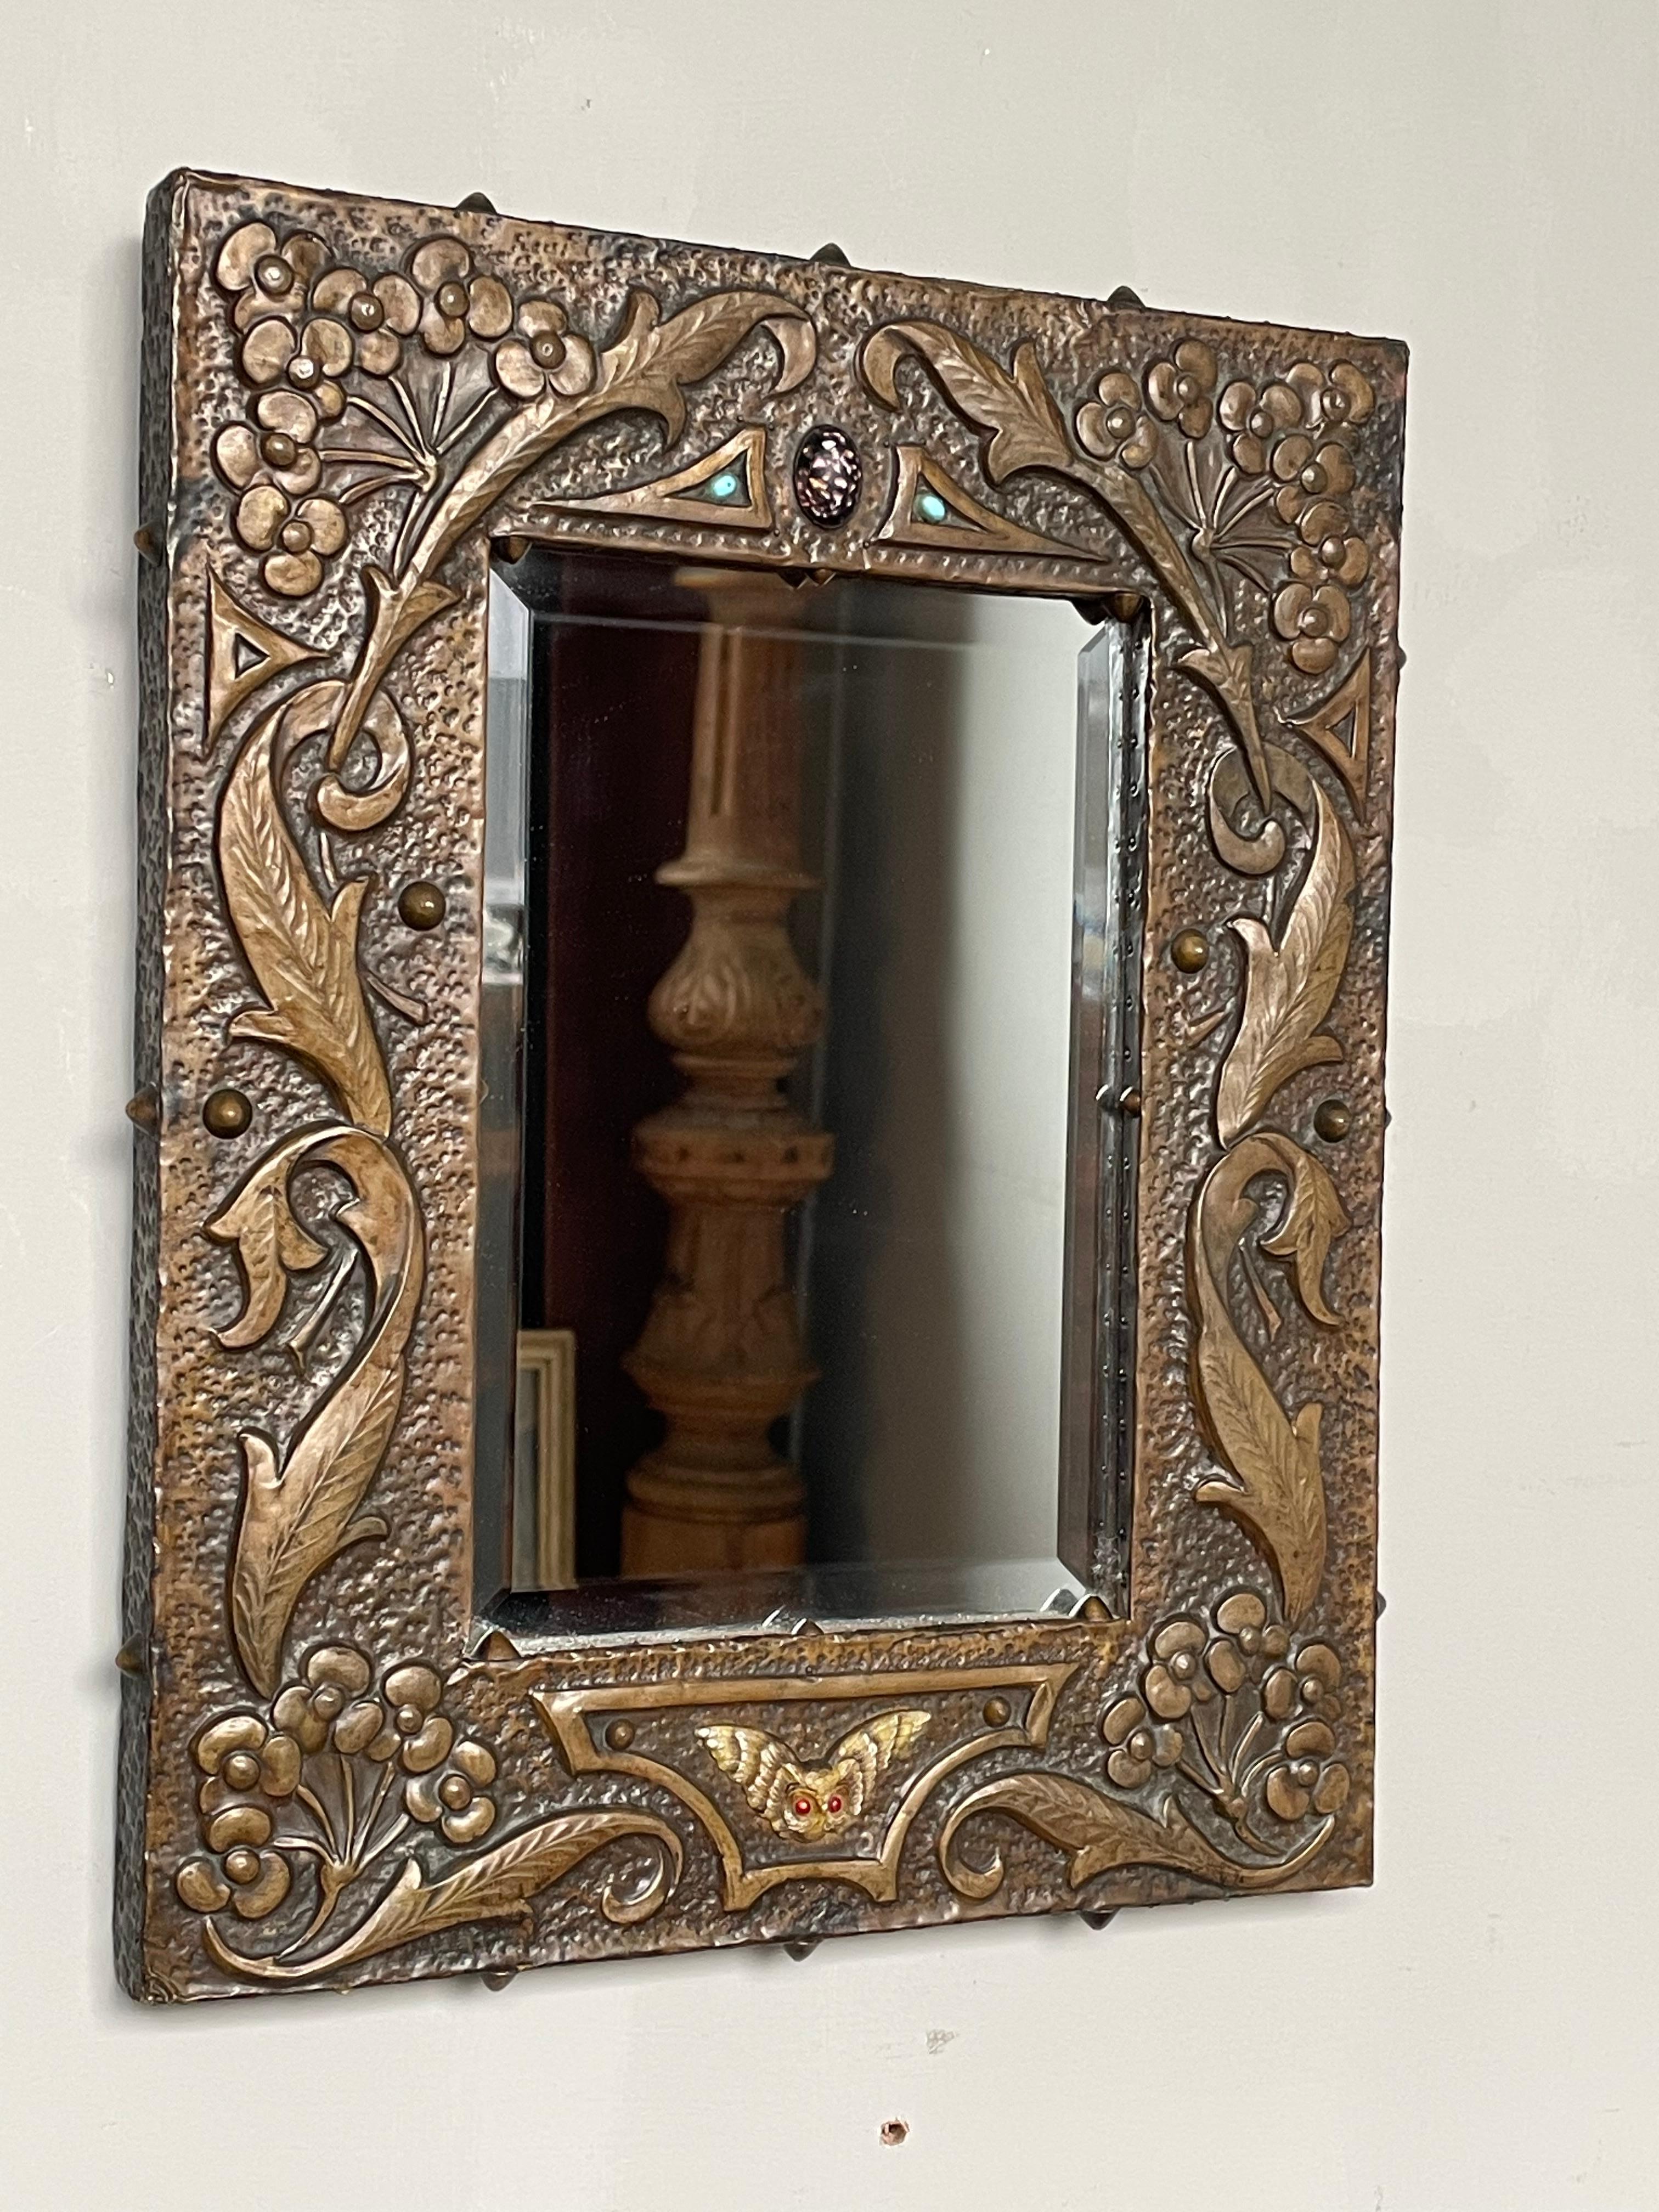 Stunning and one of a kind, work of art wall mirror.

This unique and truly marvelous work of art(s and crafts) is another one of our recent great finds. It is antiques like this that are a big part of why we are so grateful to be able to do what we